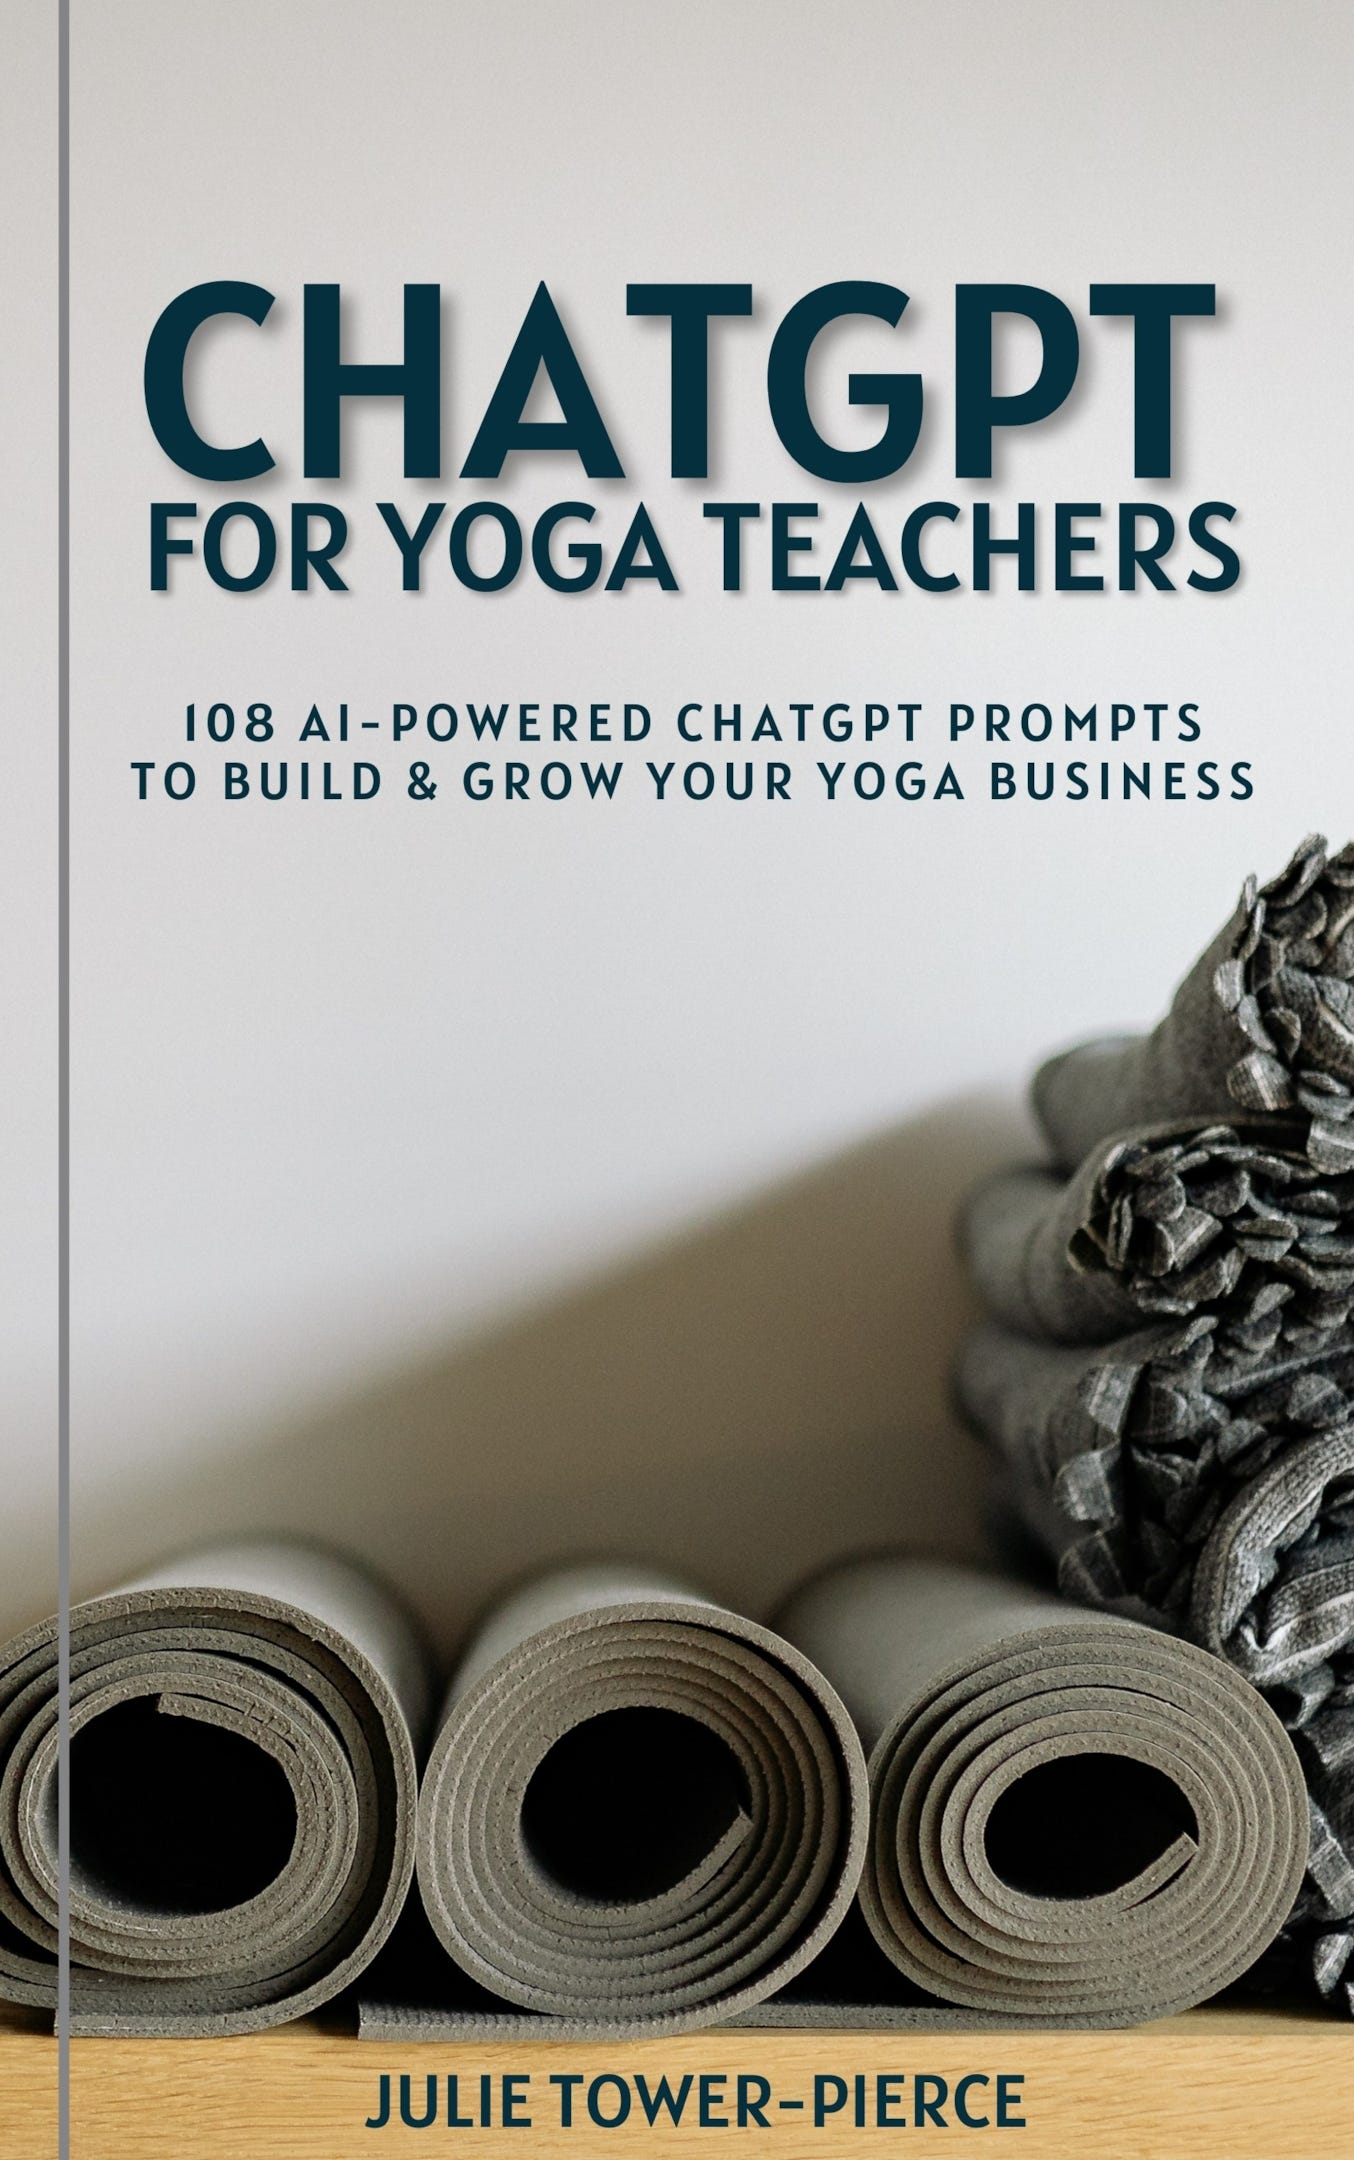 Grab a copy of my book now. You can find it on Amazon. It will help you learn how to use prompts with ChatGPT to get answers you seek for your biz.